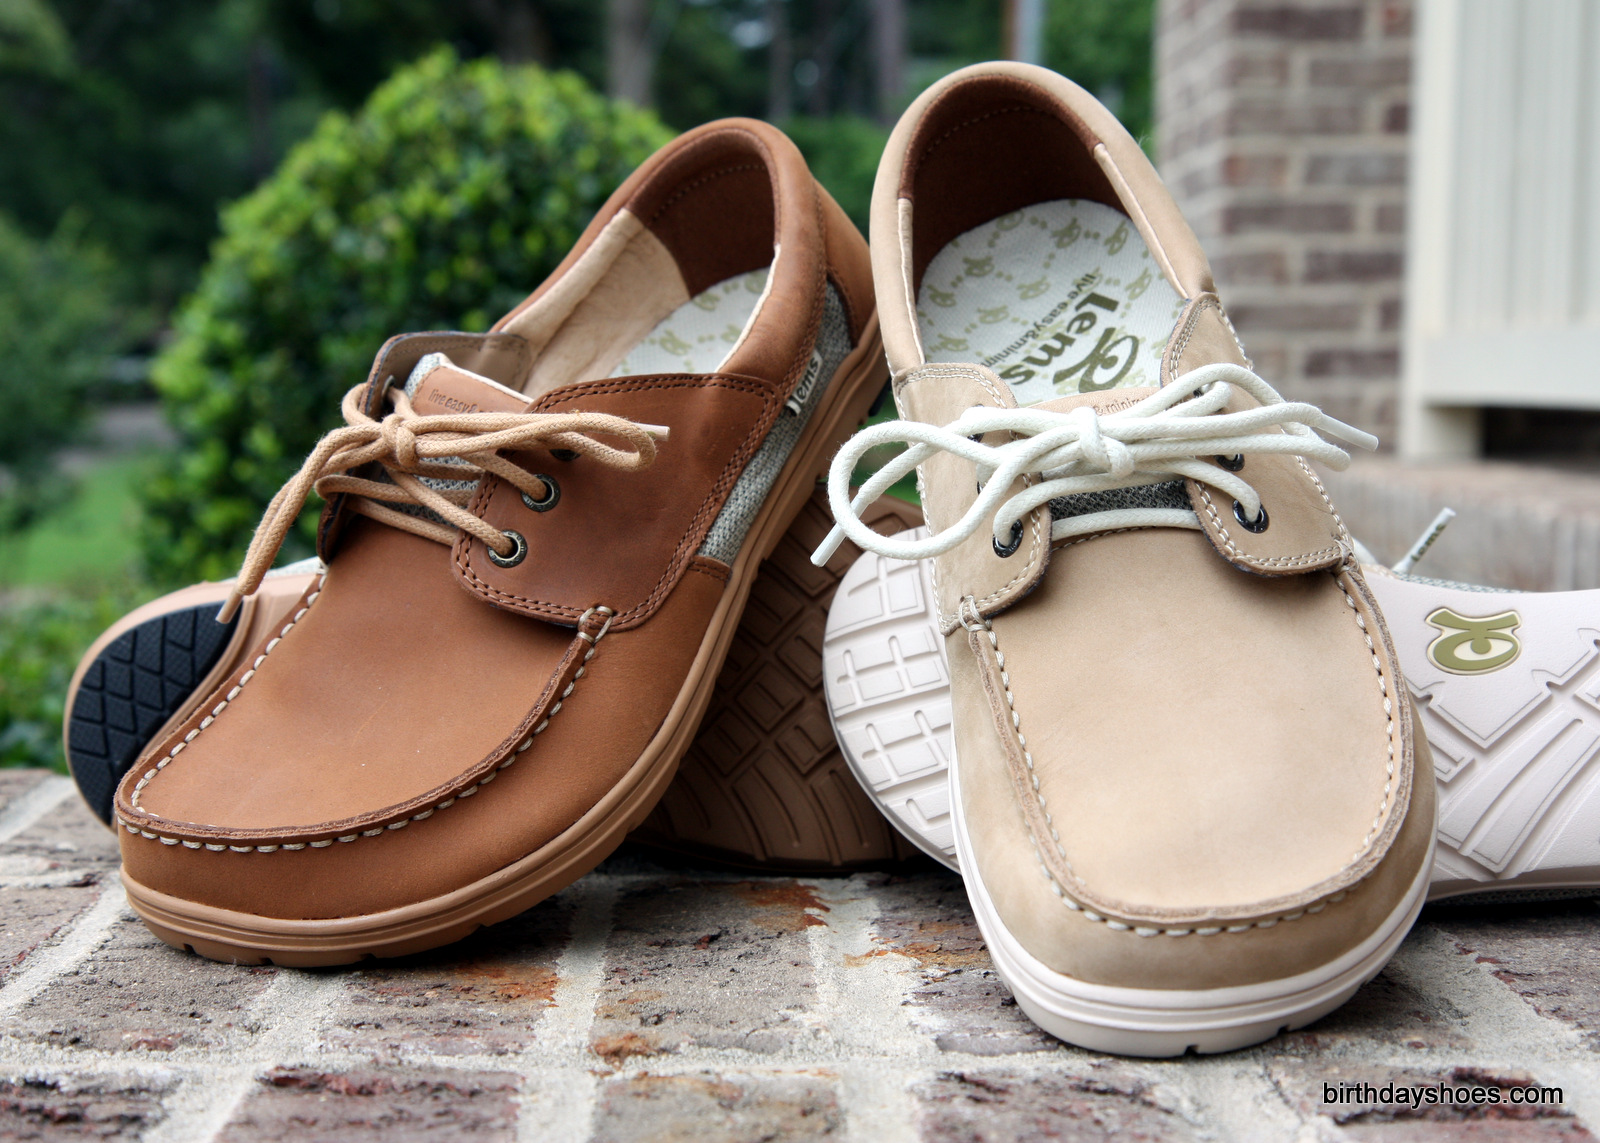 The Lems Mariner boat shoes come in two colorways.  On the left are the Mariners seen in the 